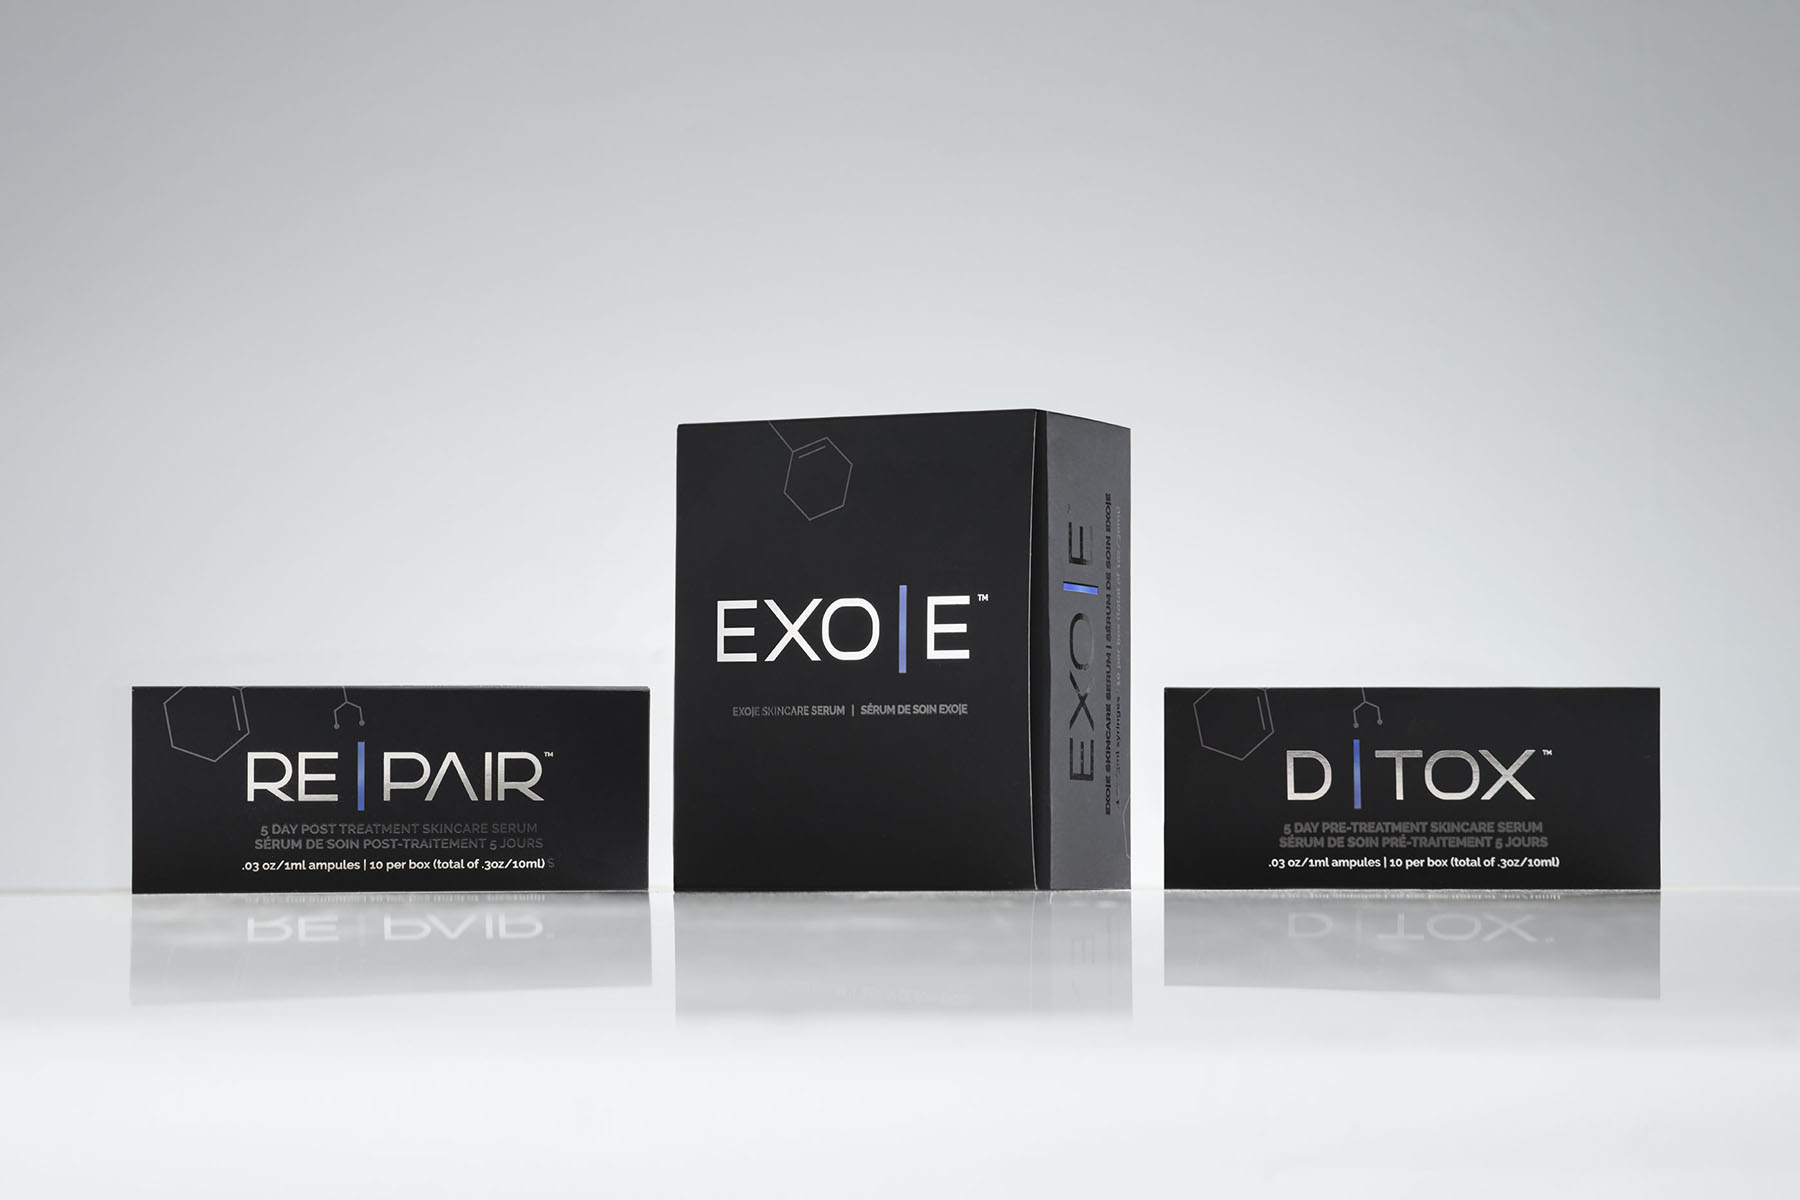 Image of Skin Revitalizing Complex from EXO|E